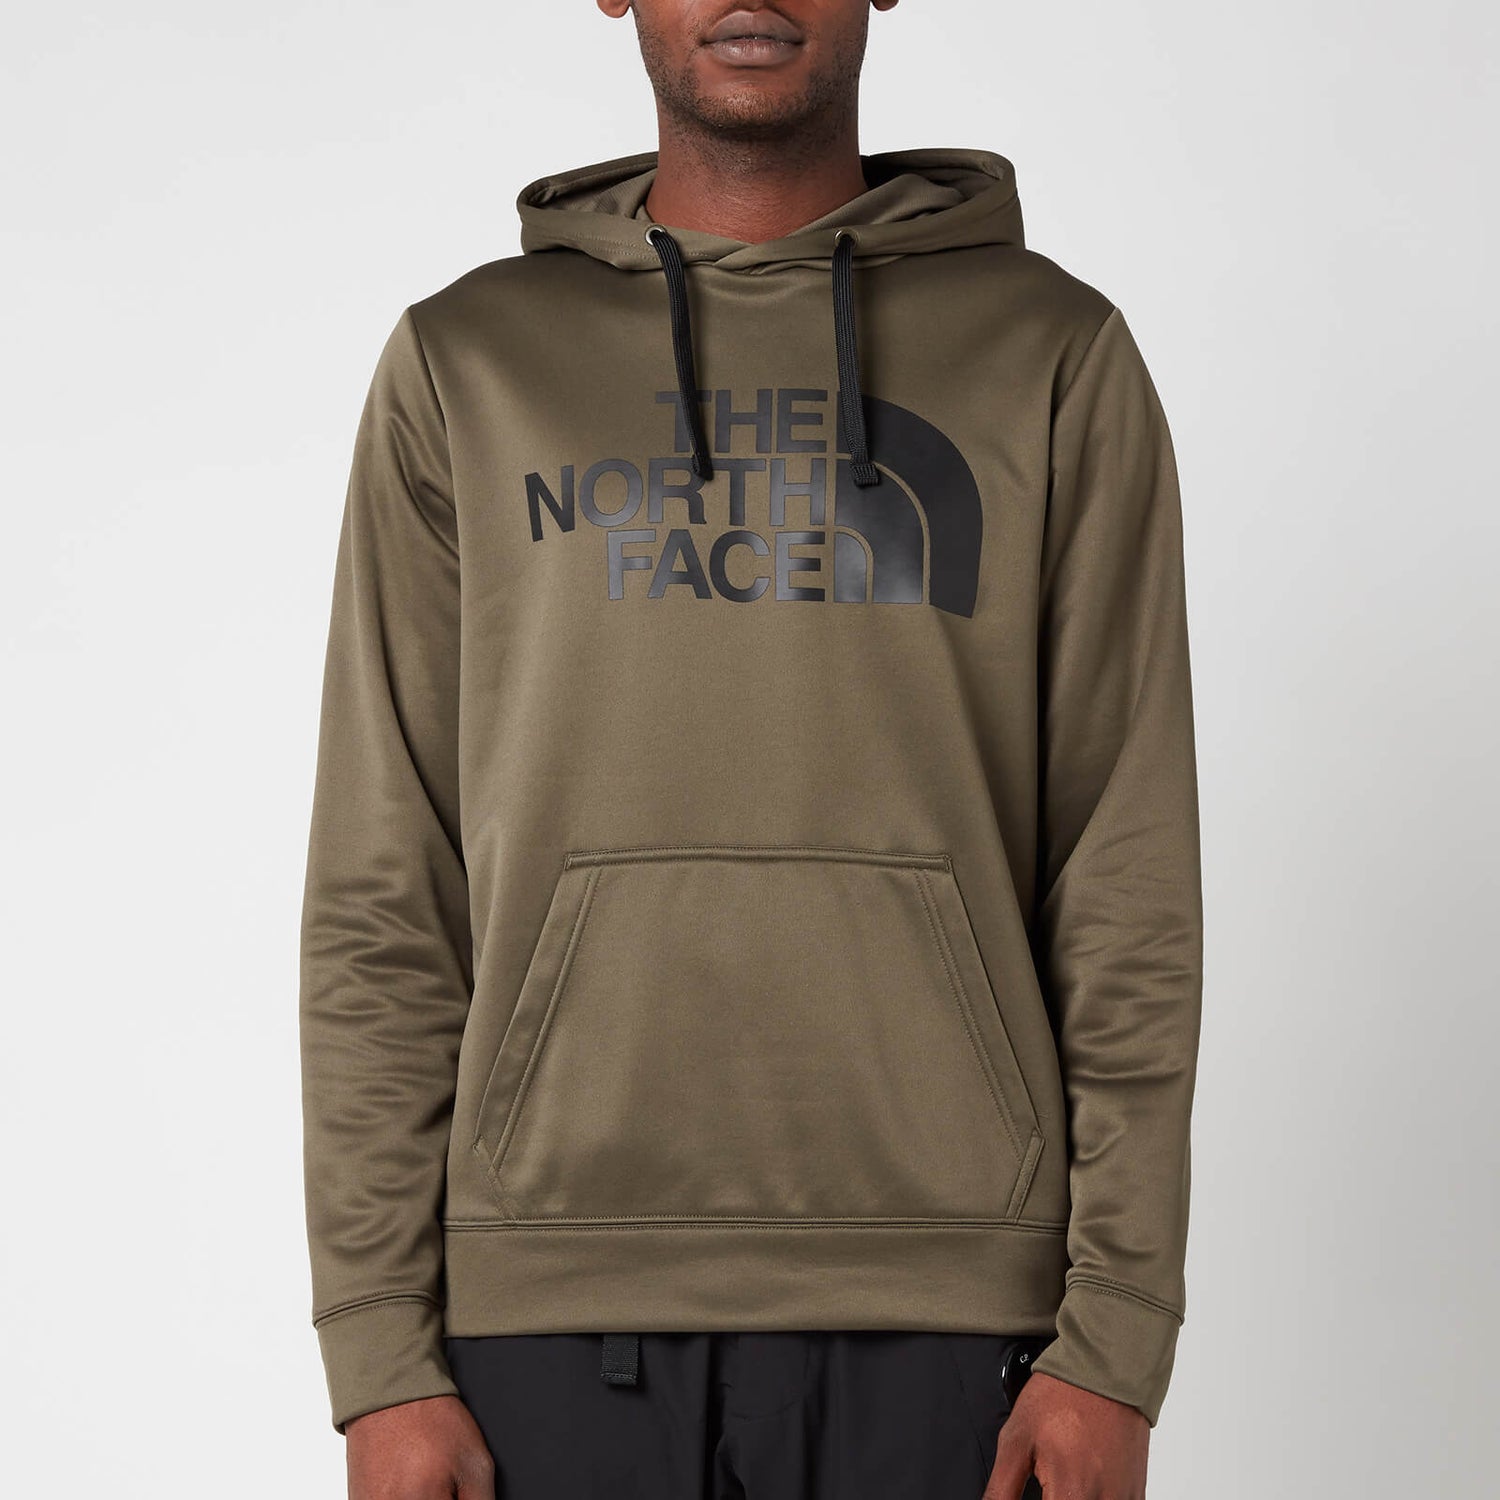 The North Face Men's Surgent Hoodie - New Taupe Green/Heather